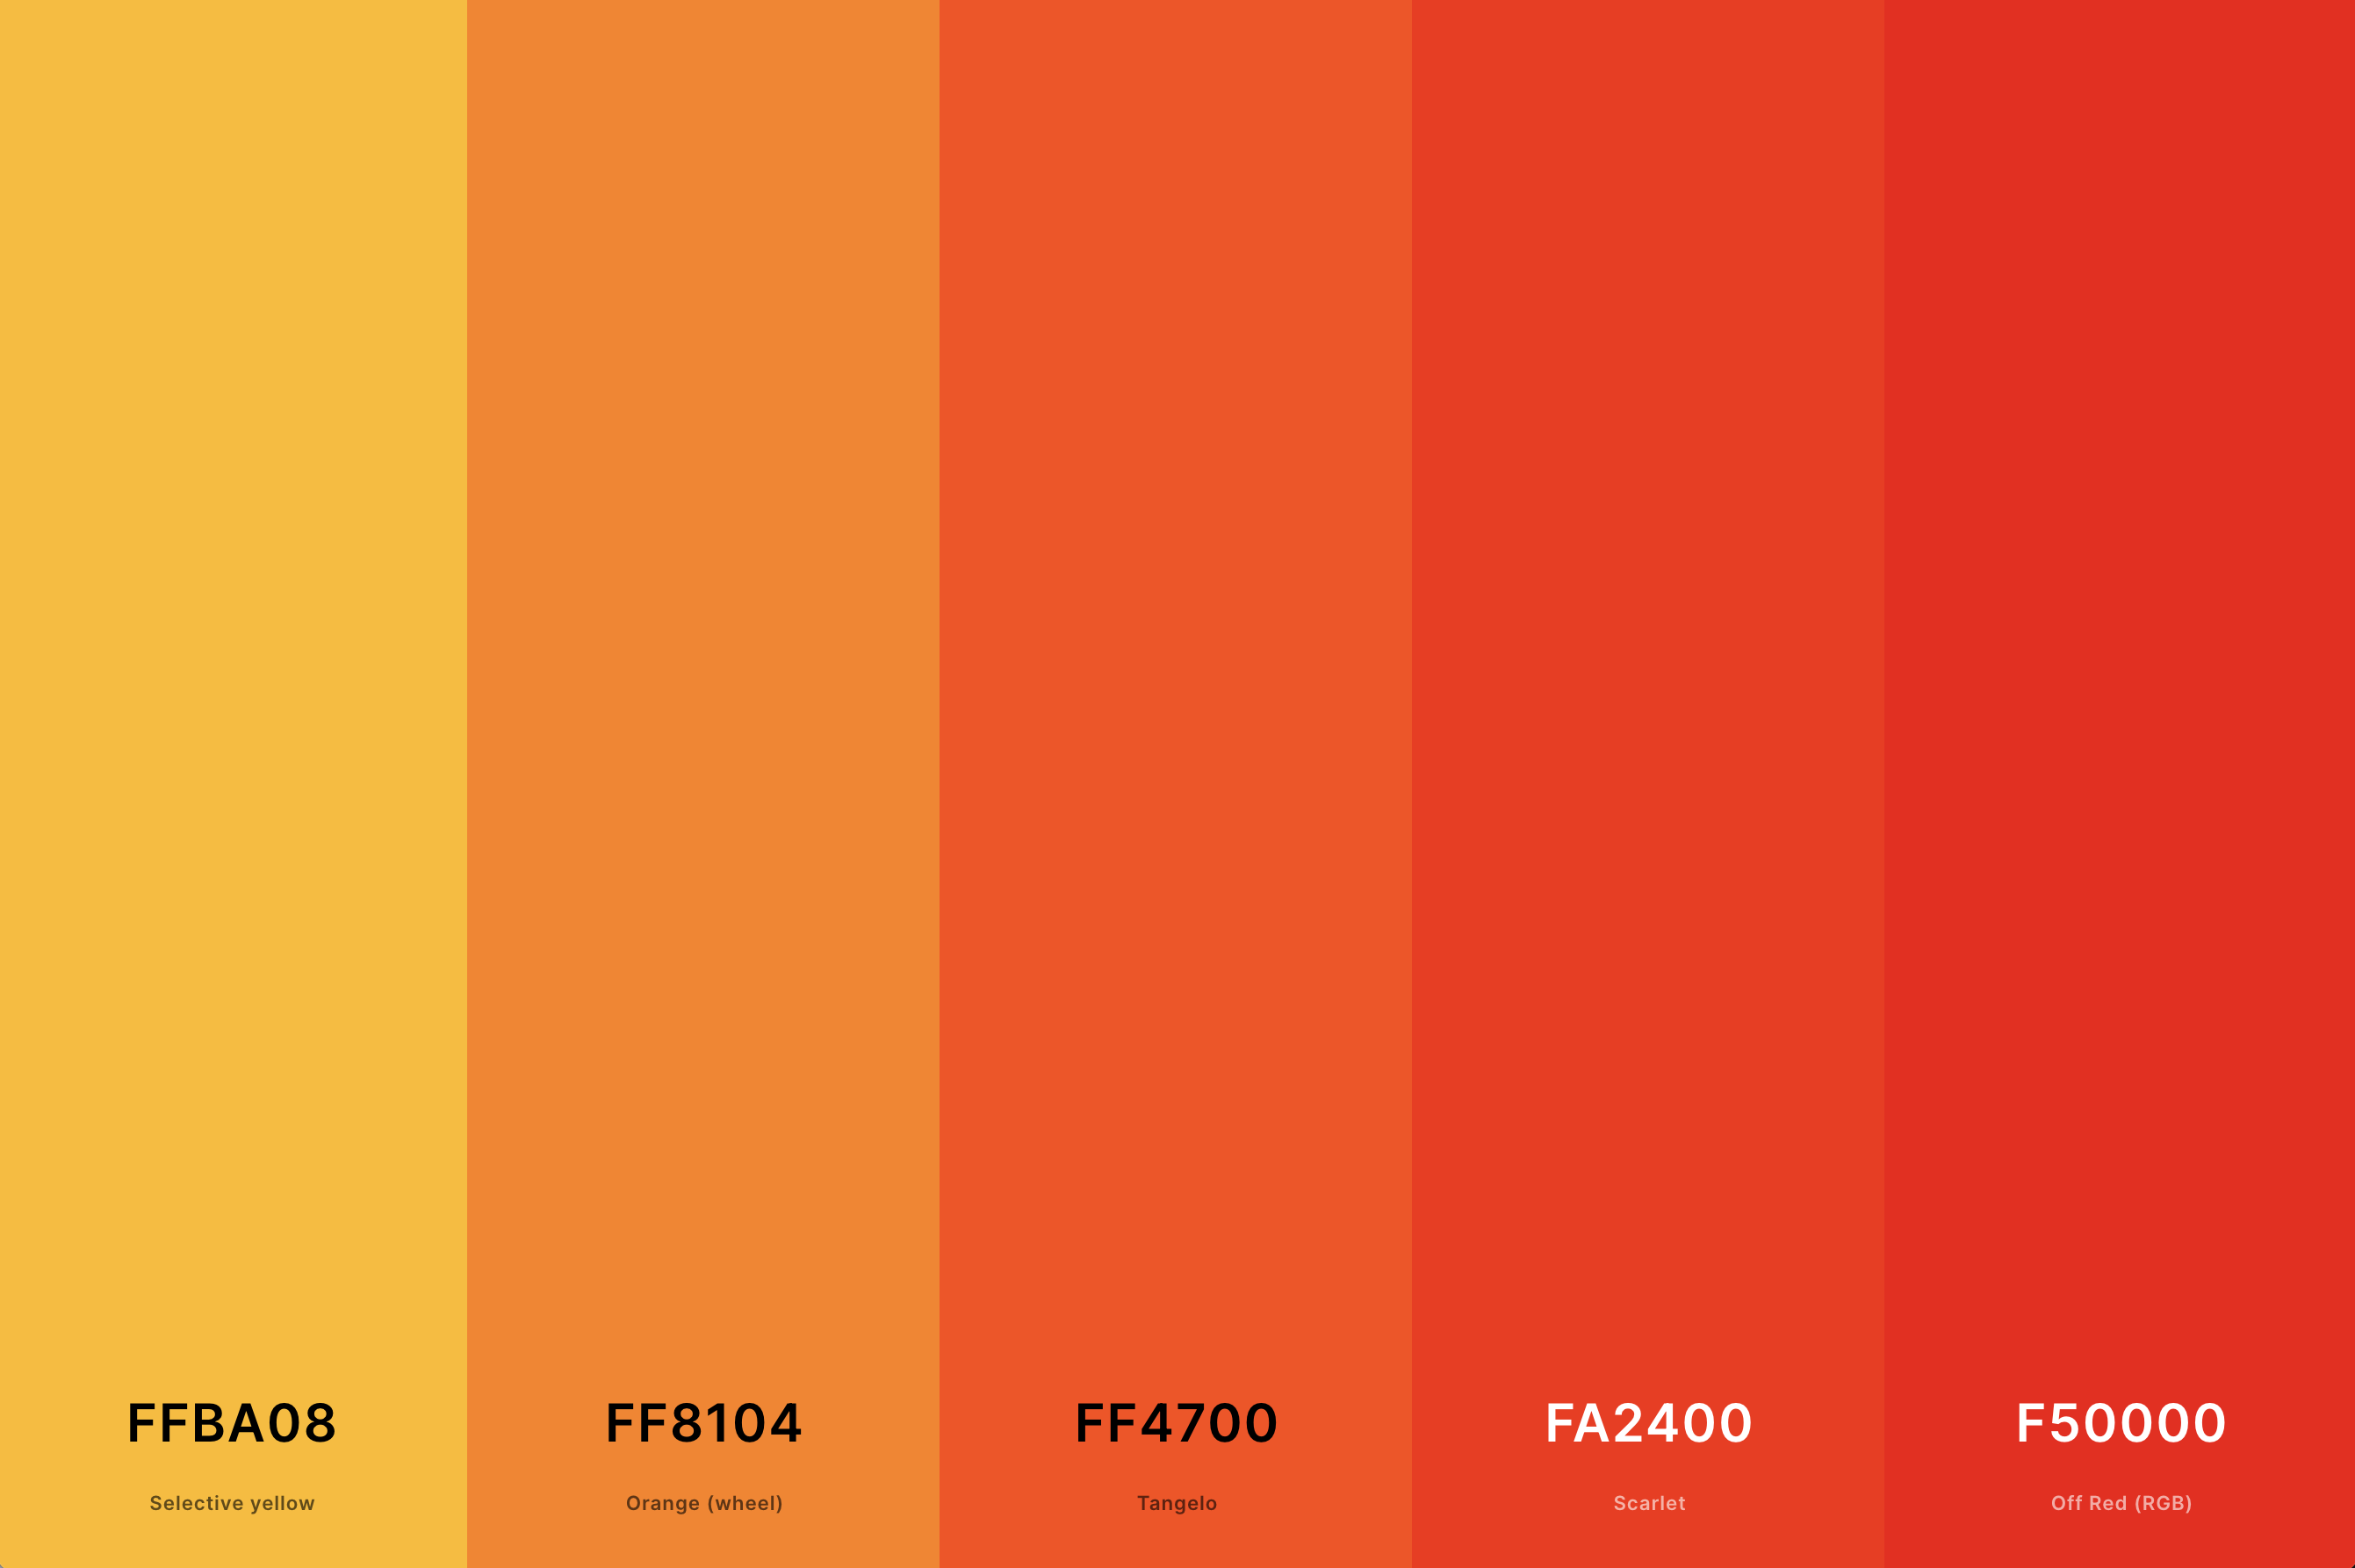 10. Red And Orange Color Palette Color Palette with Selective Yellow (Hex #FFBA08) + Orange (Wheel) (Hex #FF8104) + Tangelo (Hex #FF4700) + Scarlet (Hex #FA2400) + Off Red (Rgb) (Hex #F50000) Color Palette with Hex Codes